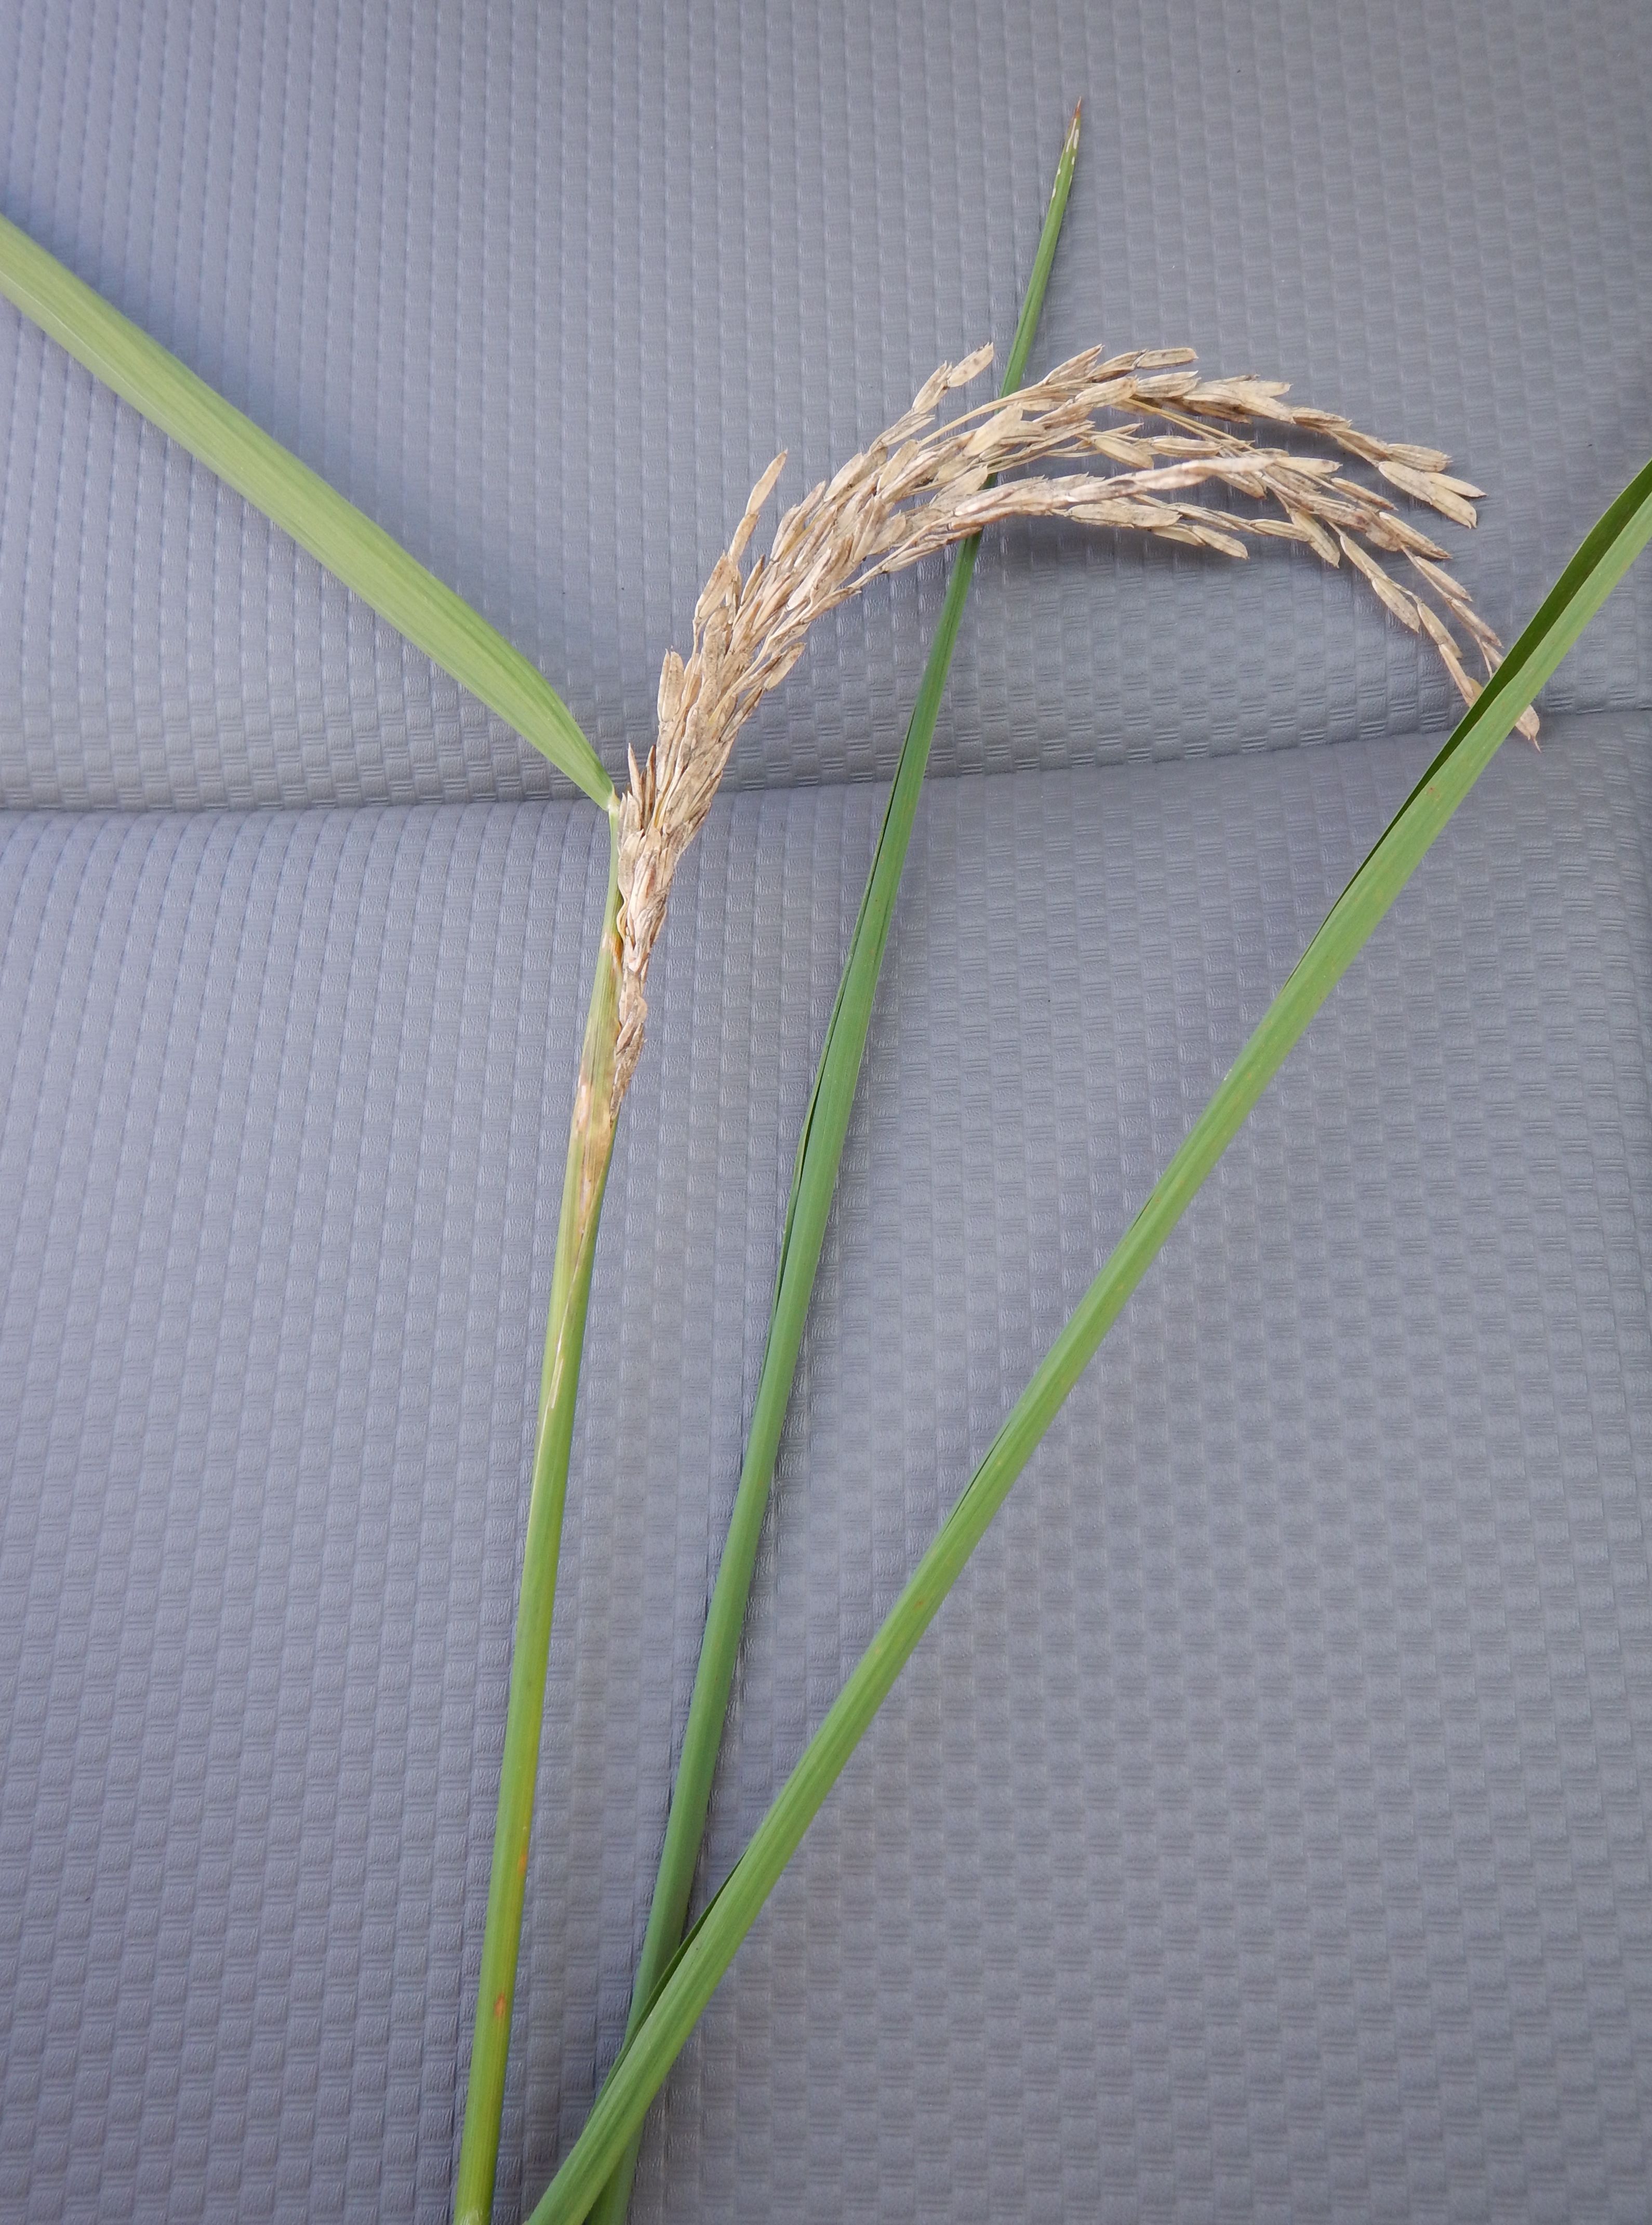 Whitehead caused by sugarcane borer feeding within the rice culm. 